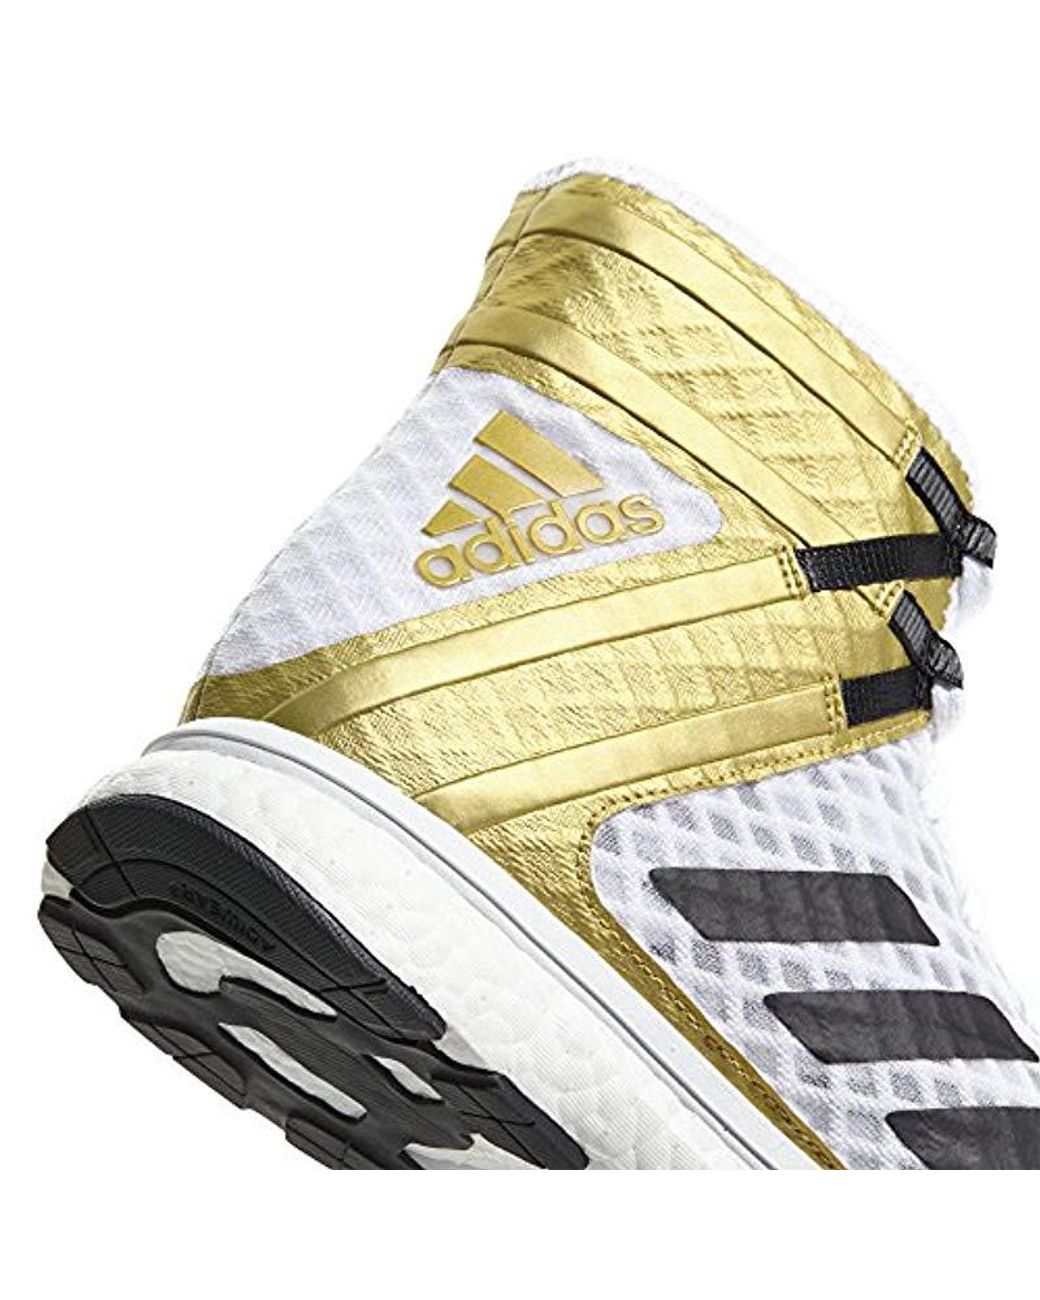 adidas Synthetic Speedex 16.1 Boost Boxing Shoes in Gold (Metallic) for Men  | Lyst UK